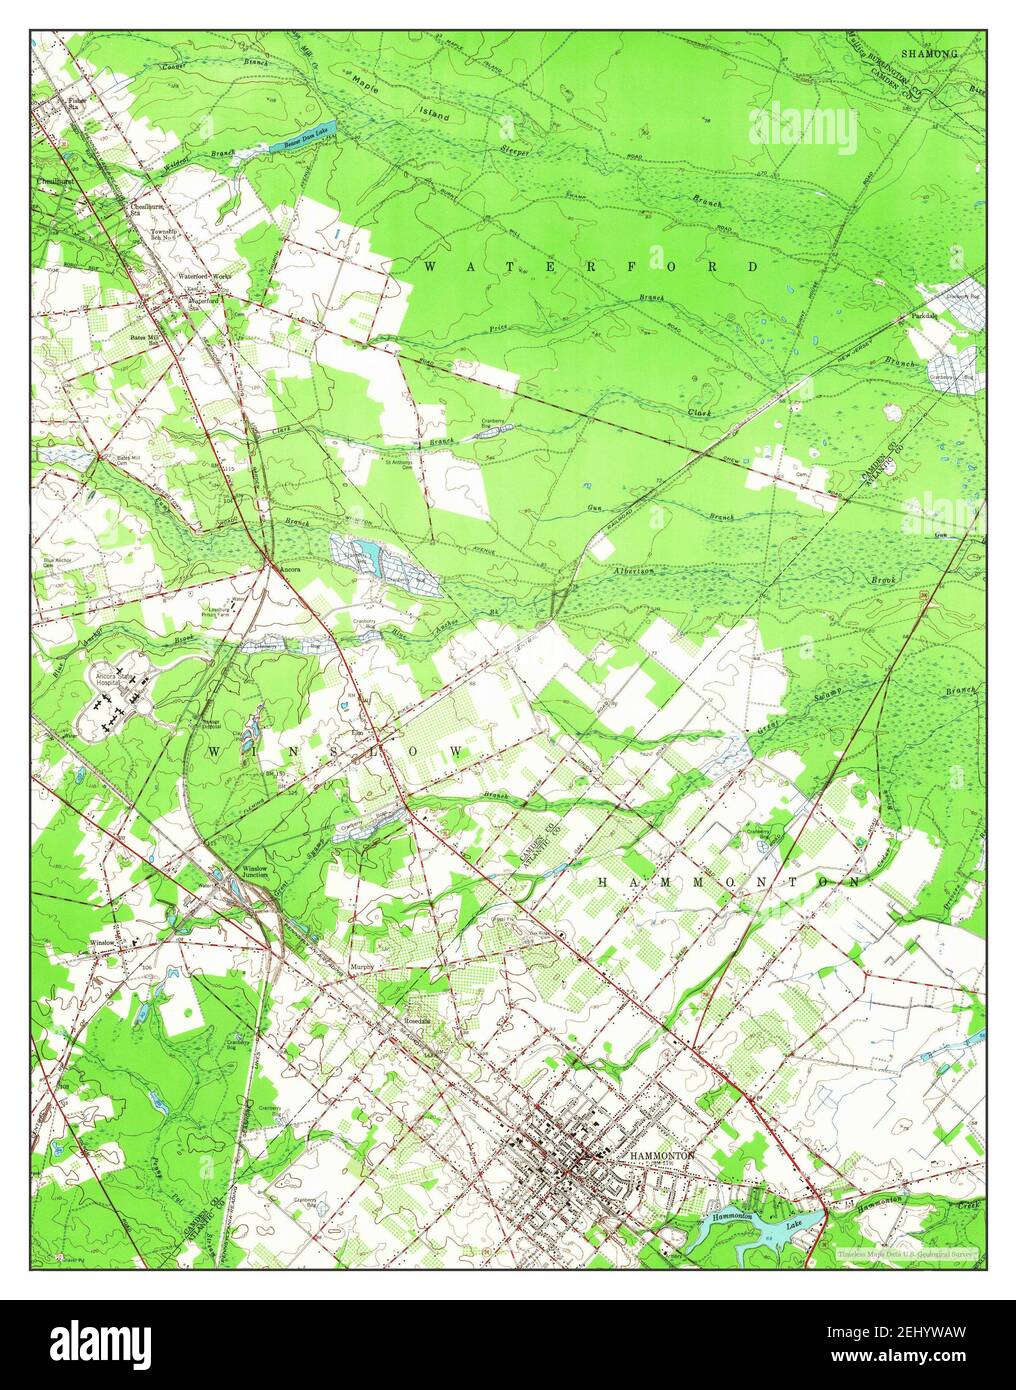 Hammonton, New Jersey, map 1953, 1:24000, United States of America by Timeless Maps, data U.S. Geological Survey Stock Photo